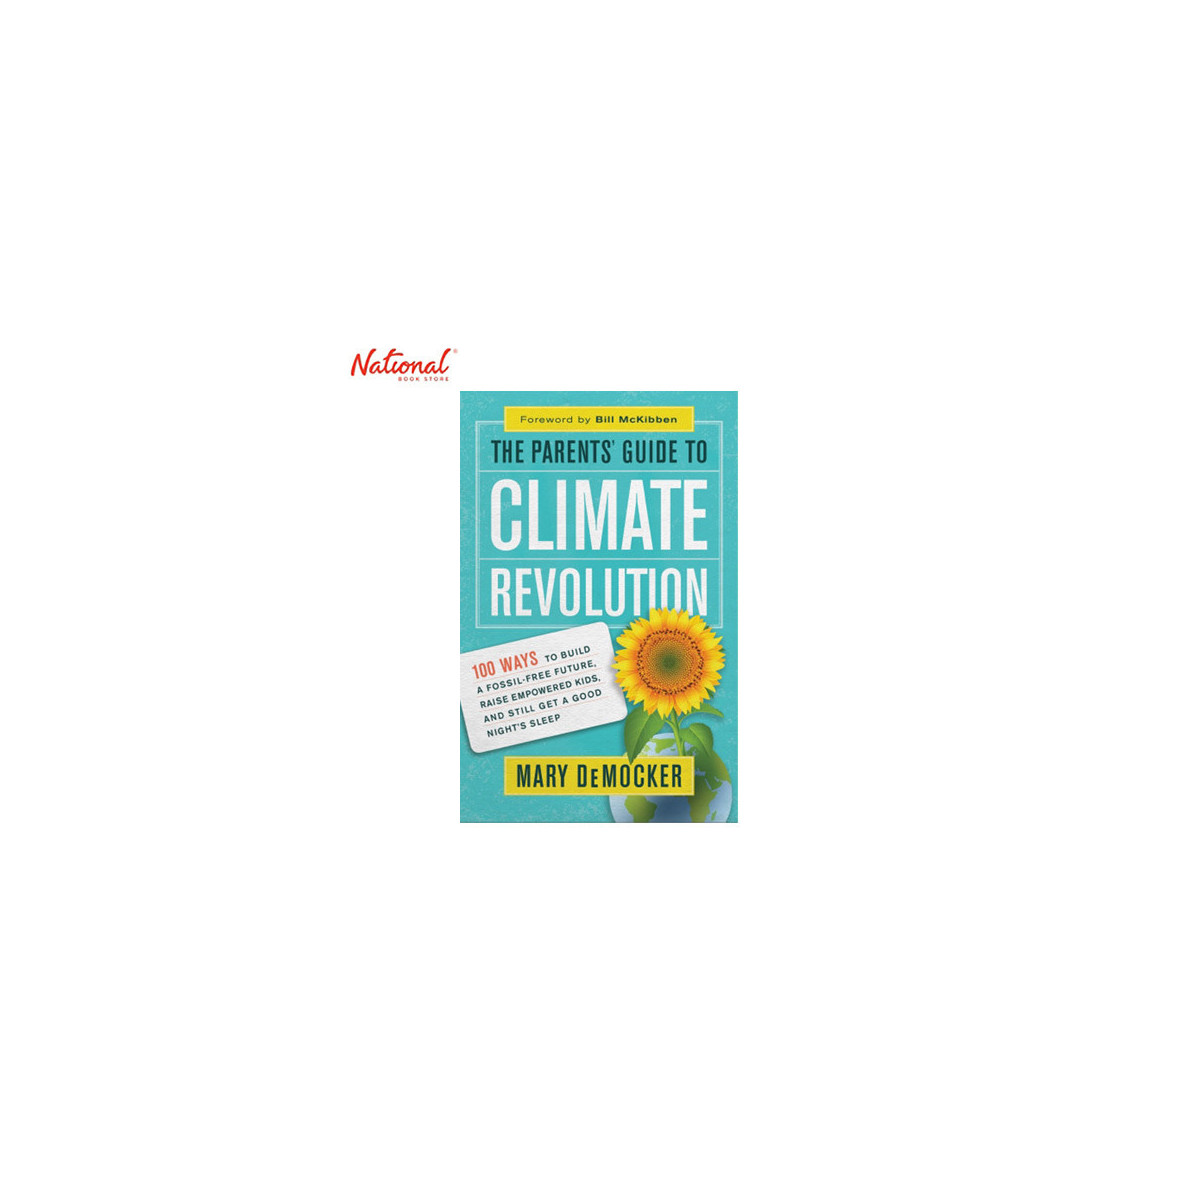 THE PARENTSÆ GUIDE TO CLIMATE REVOLUTION